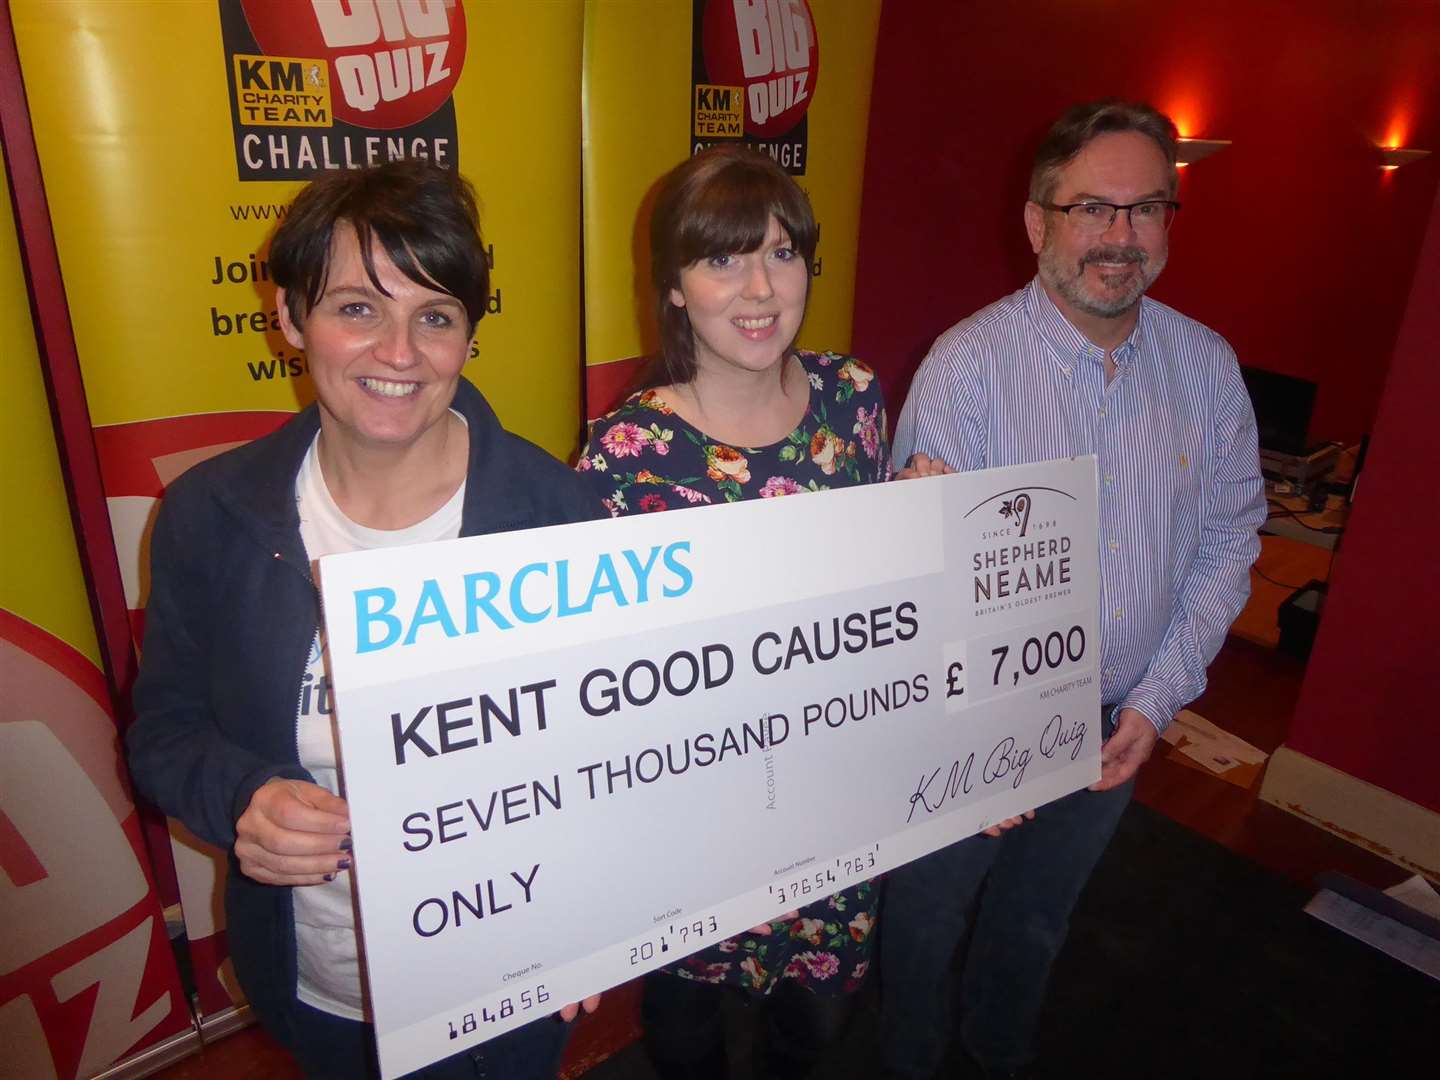 Last year's event raised £7,000 for good causes. Pictured: Donna Newland of Barclays, Jenni Horn from the Medway Messenger, and David Moorman of Specsavers.